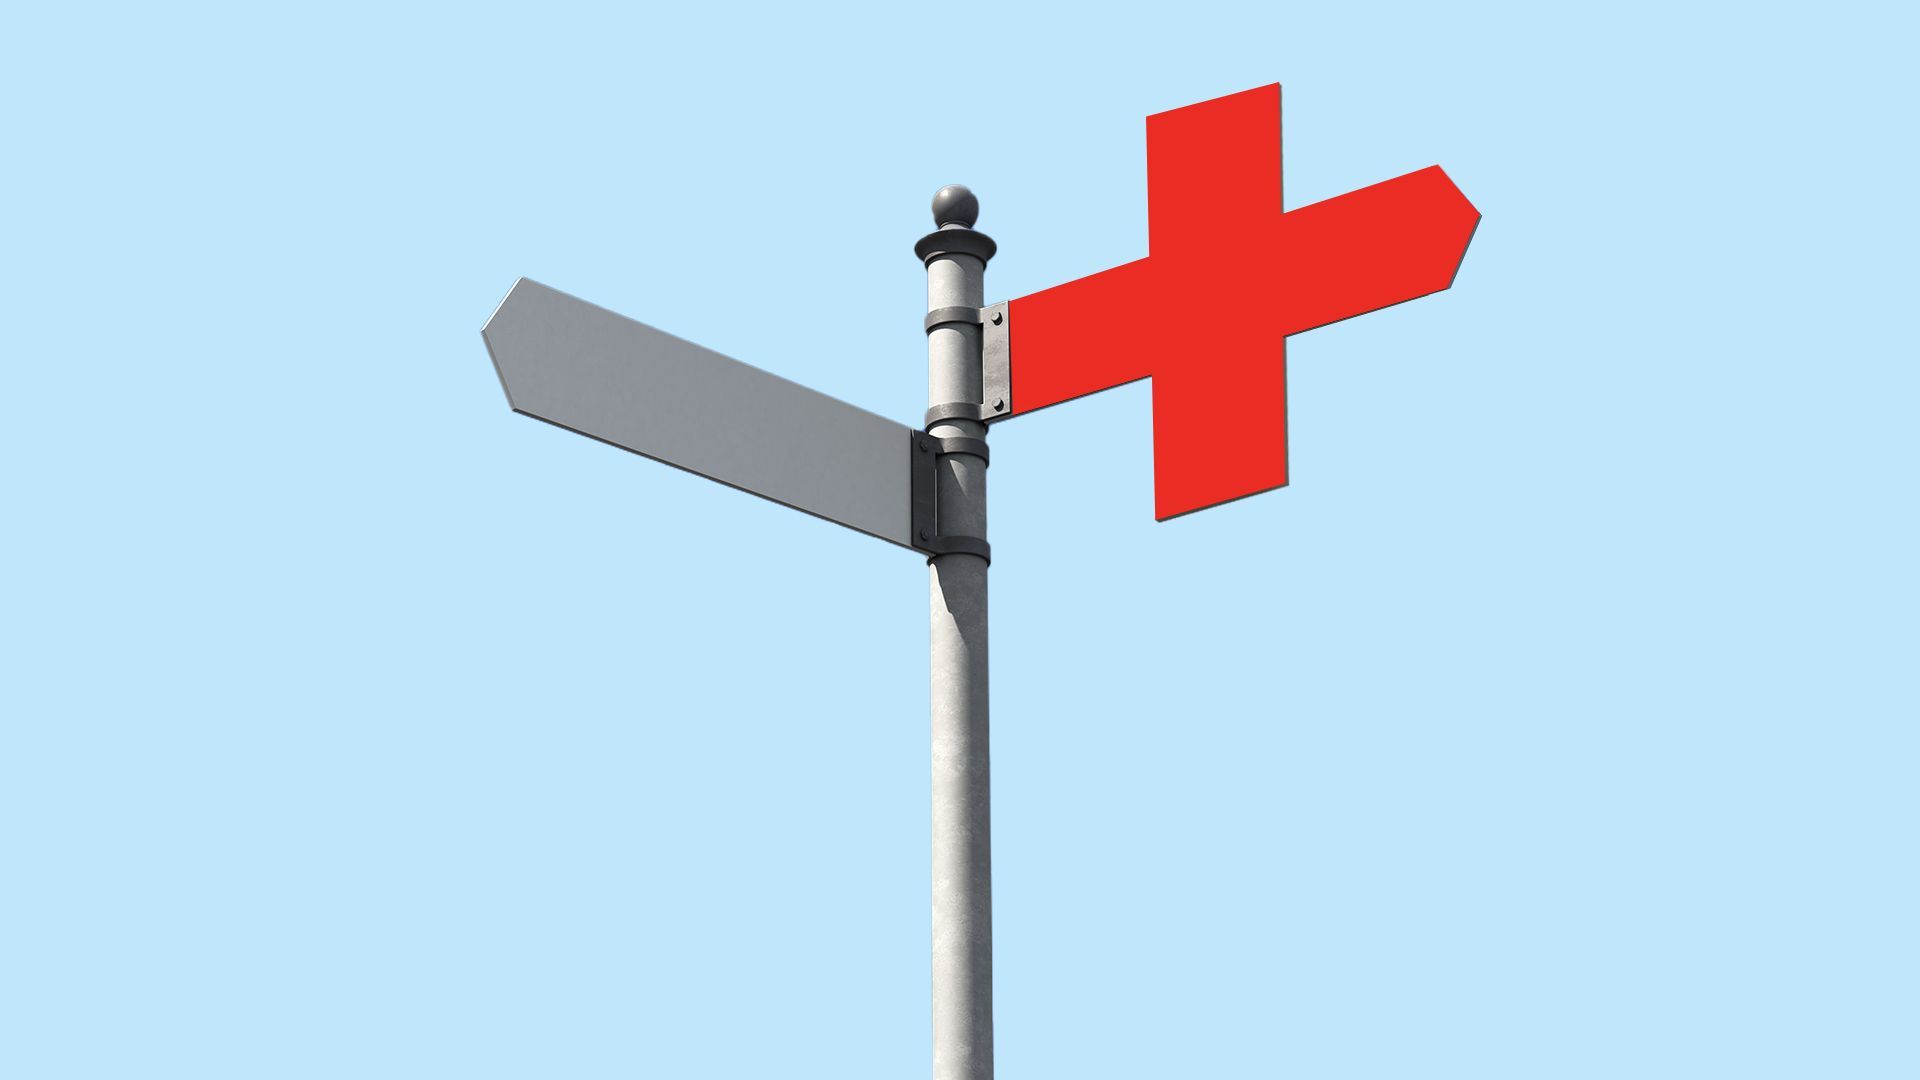 Illustration of a street sign with one sign pointing one way and another sign shaped like a health plus pointing another way